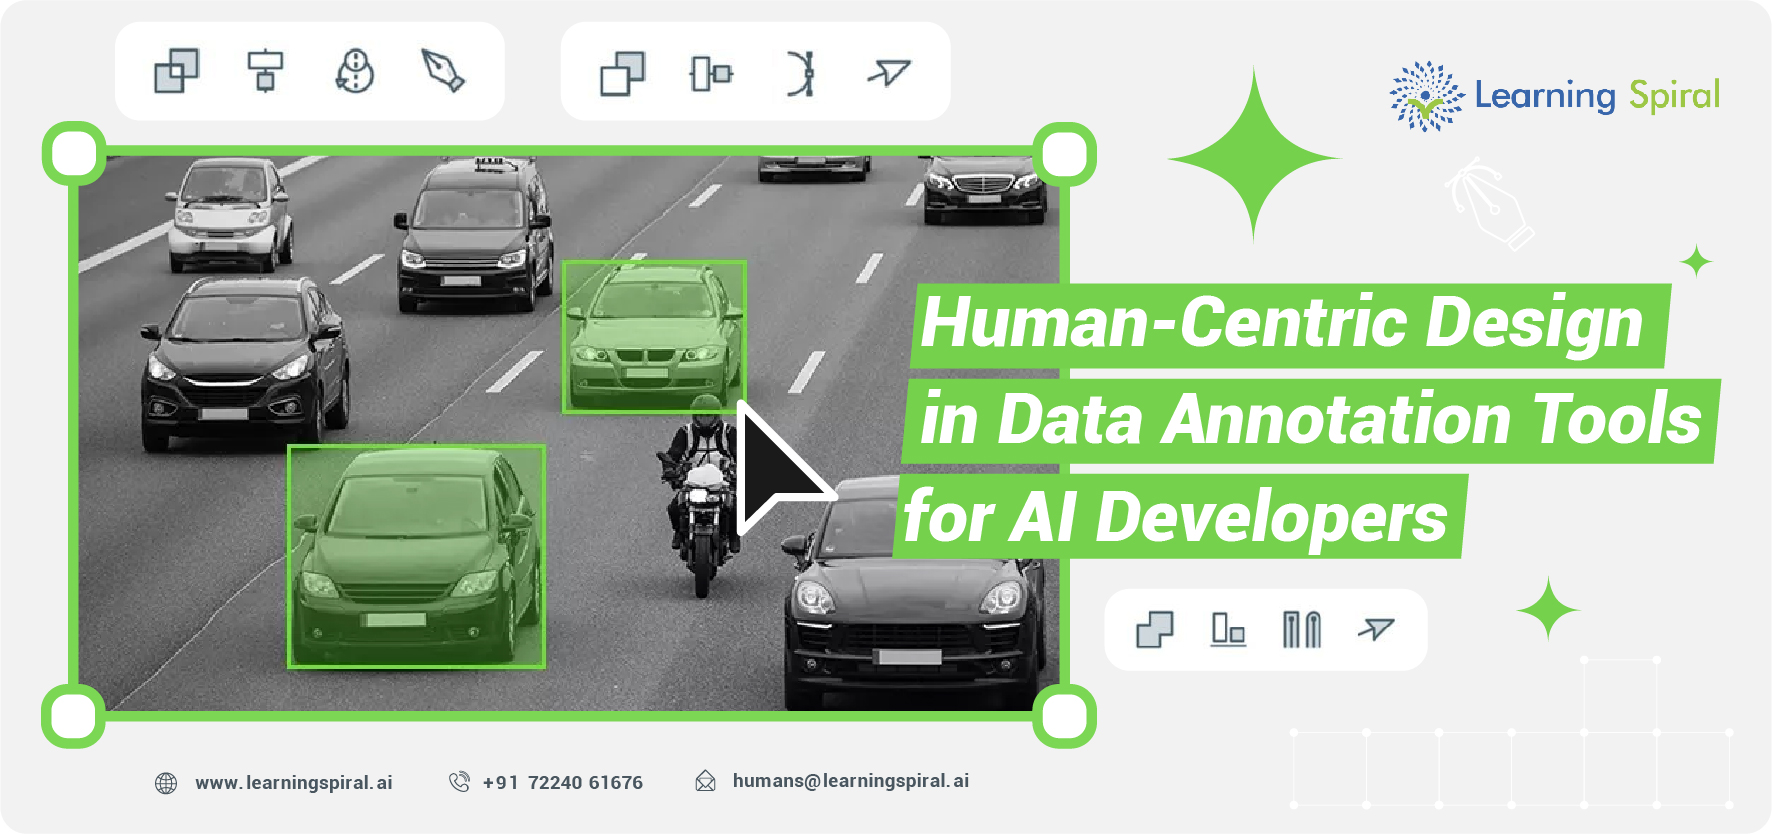 Human-Centric_Design_in_Data_Annotation_Tools_for_AI_Developers-01